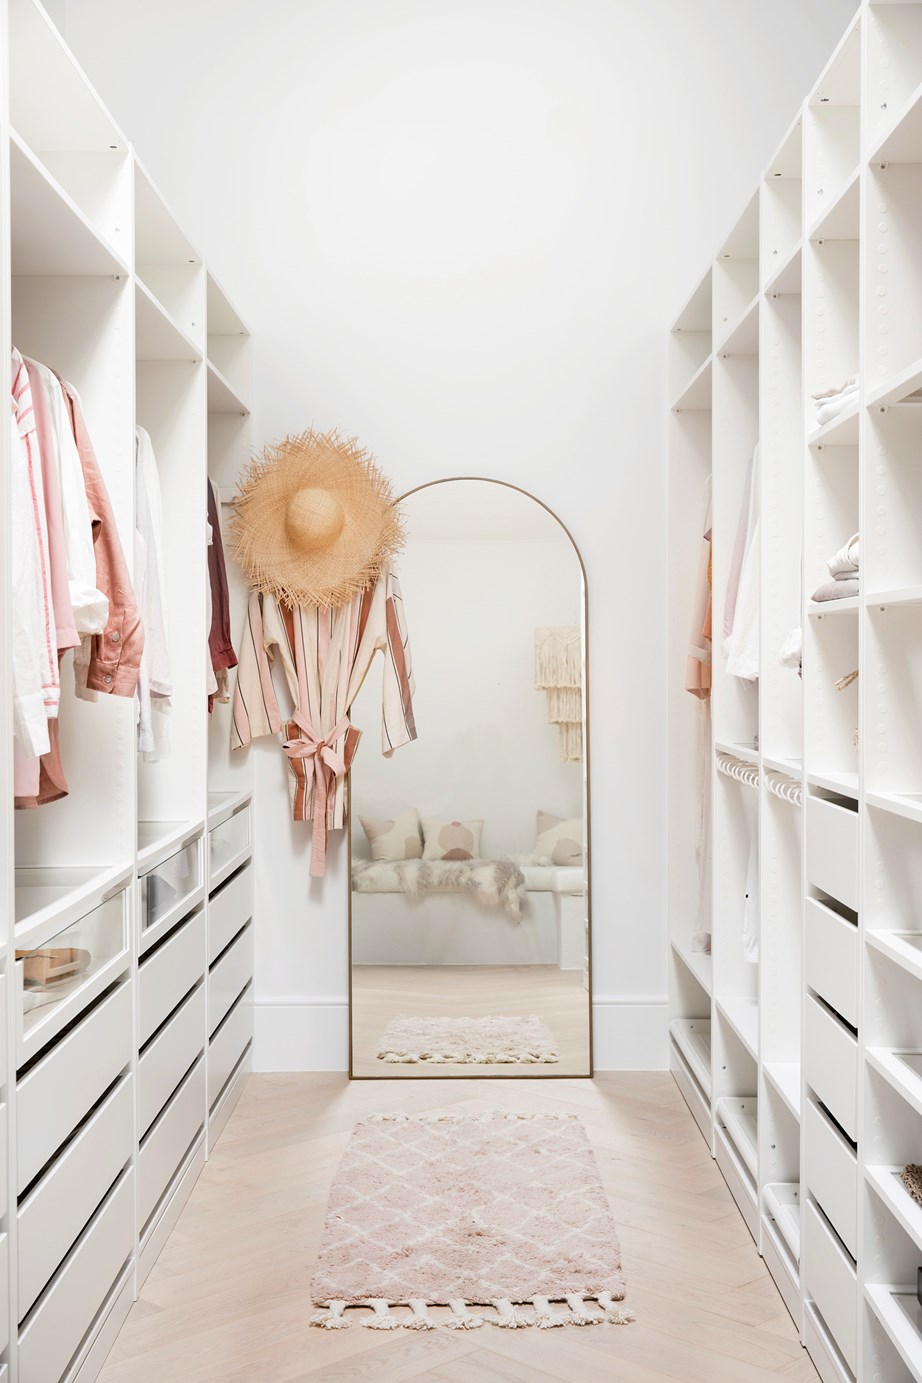 Opt for a walk-in wardrobe without doors to improve airflow and visibility.